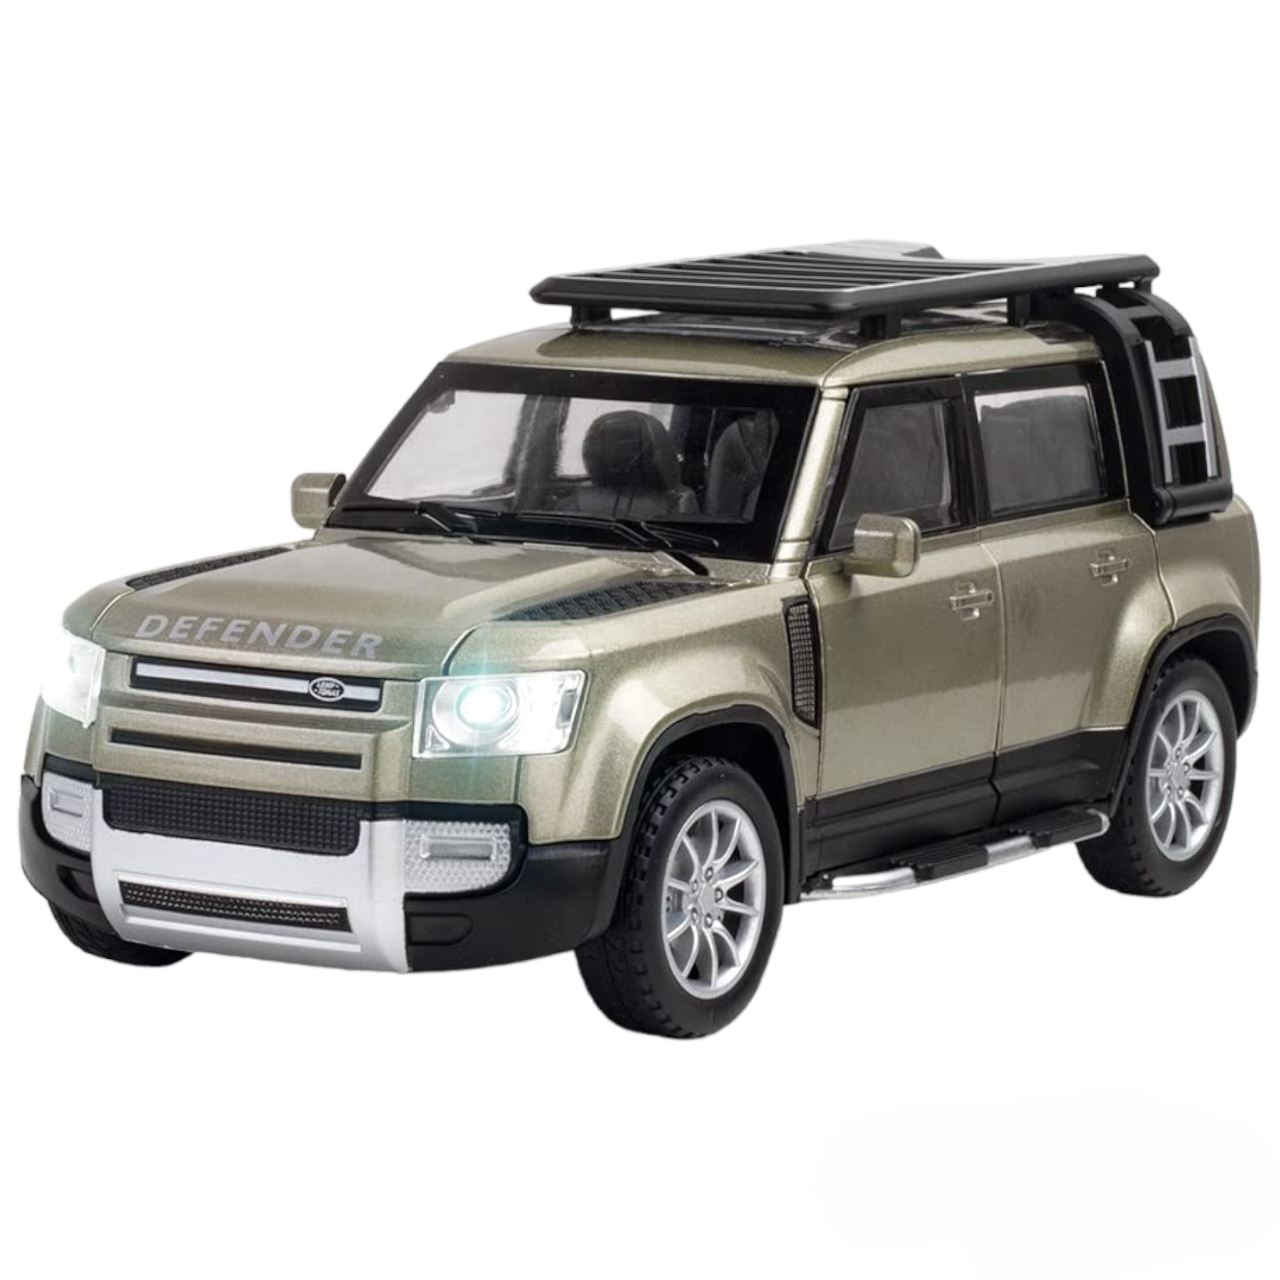 Land Rover Defender 1:24 Scale Die cast Metal Pullback Toy car with Openable Doors & Light(Gold)